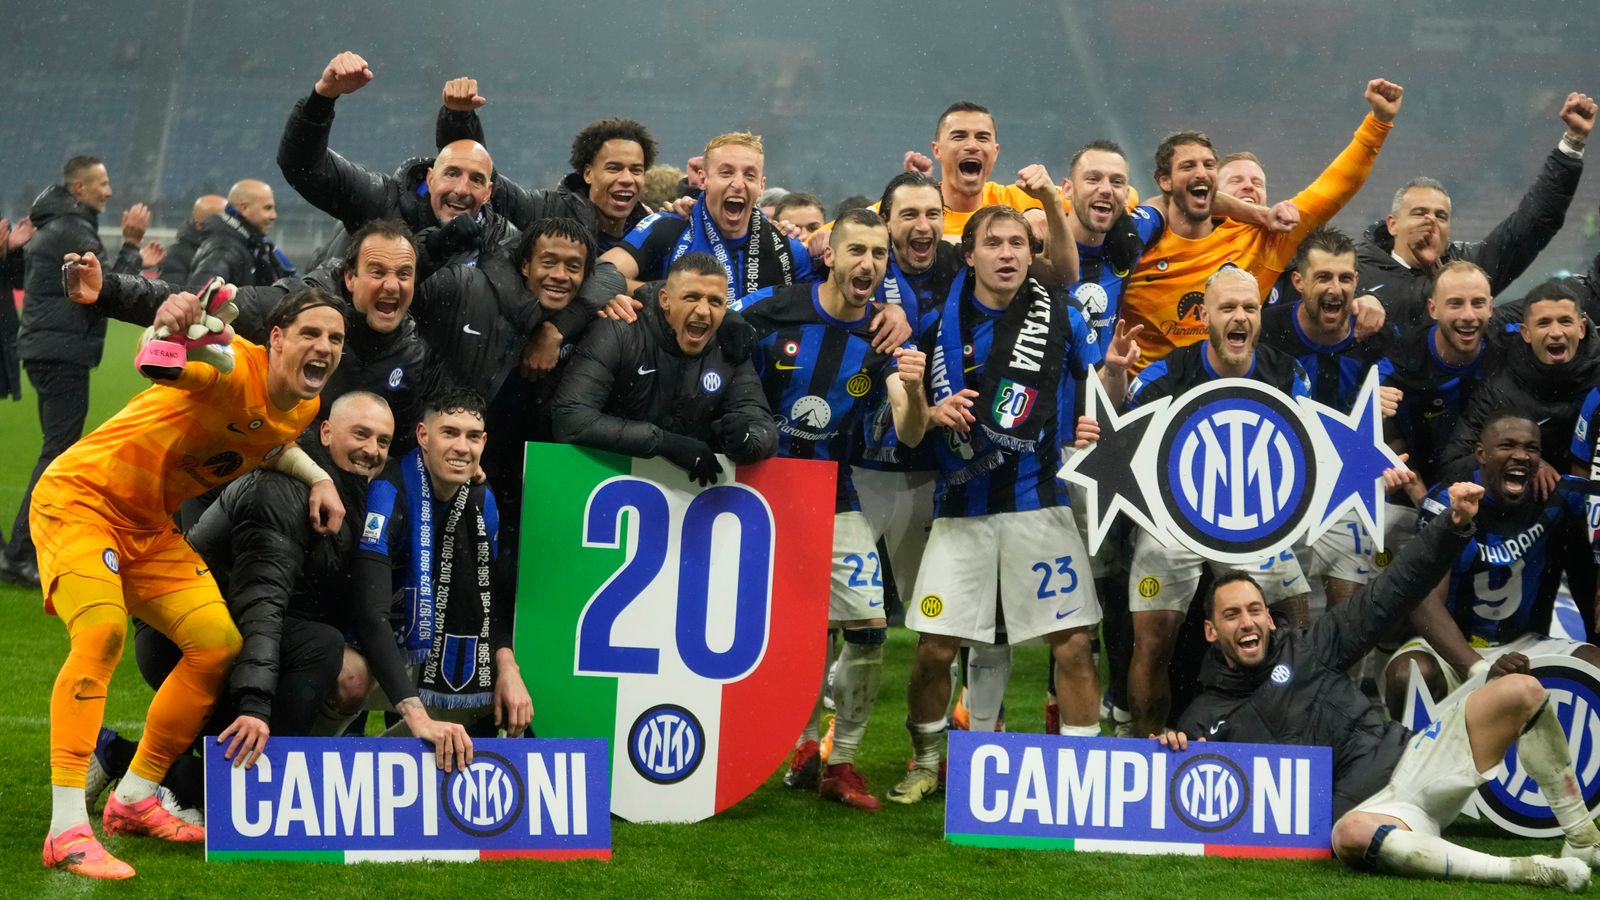 AC Milan 1-2 Inter Milan: Inter clinch Serie A title with victory over rivals | Football News | Sky Sports